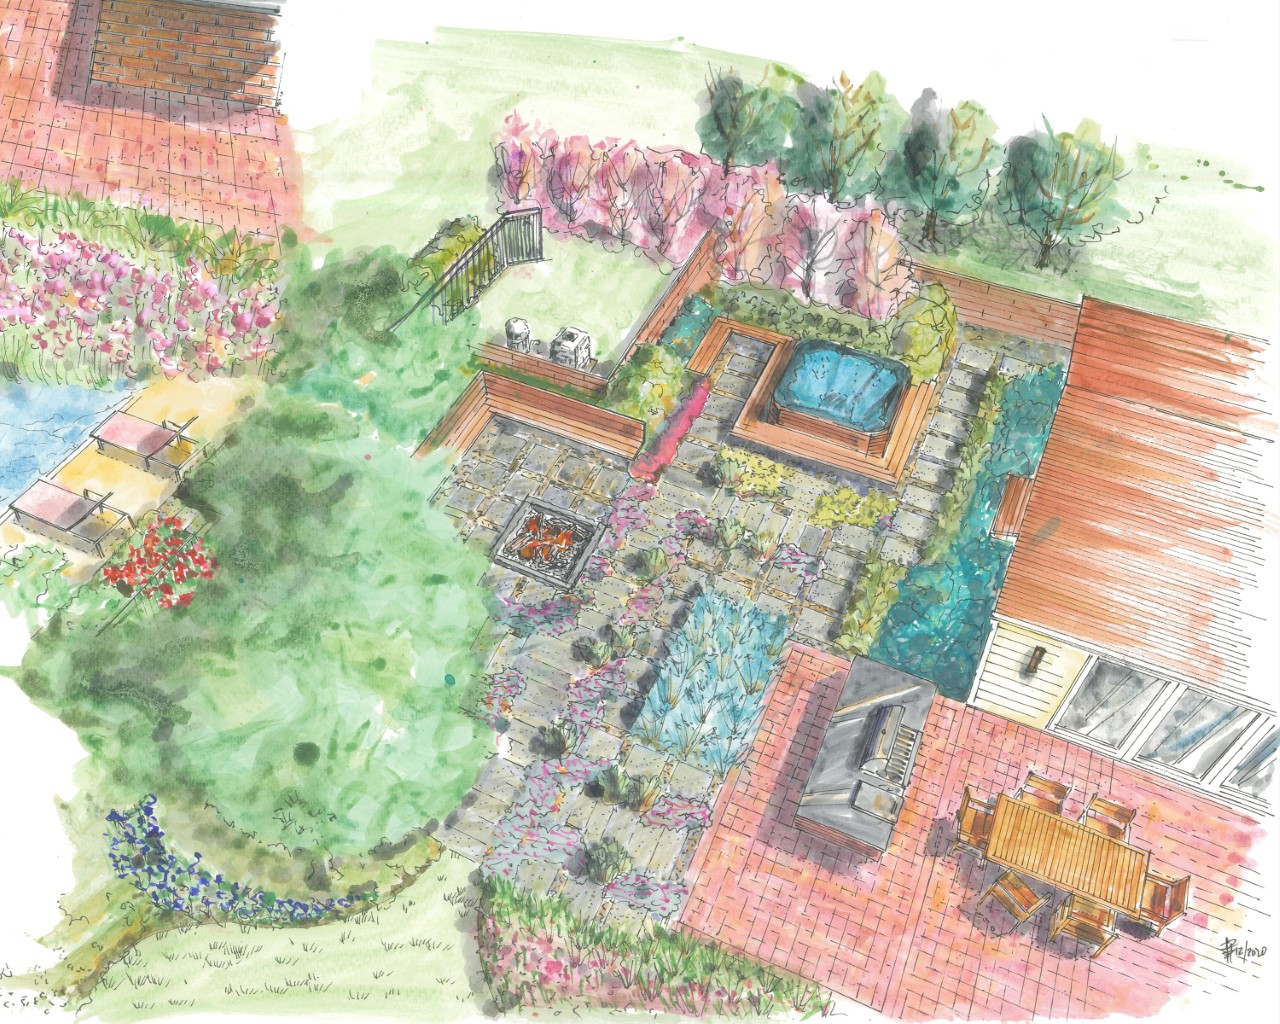 We love presenting our landscape design creations to our clients!  We  work with them to integrate their inspirations into a working concept.  We produced a hand rendered 3D aerial perspective so our clients could see some of the details that we are proposing! The wish list for this project includes:  Hot tub, Natural wood seating & Fence, Plantings, Fire Pit, Sink, Walkway, and Pathways. www.gardenartisansllc.com 609-273-6519 609-647-0666 609-371-0099